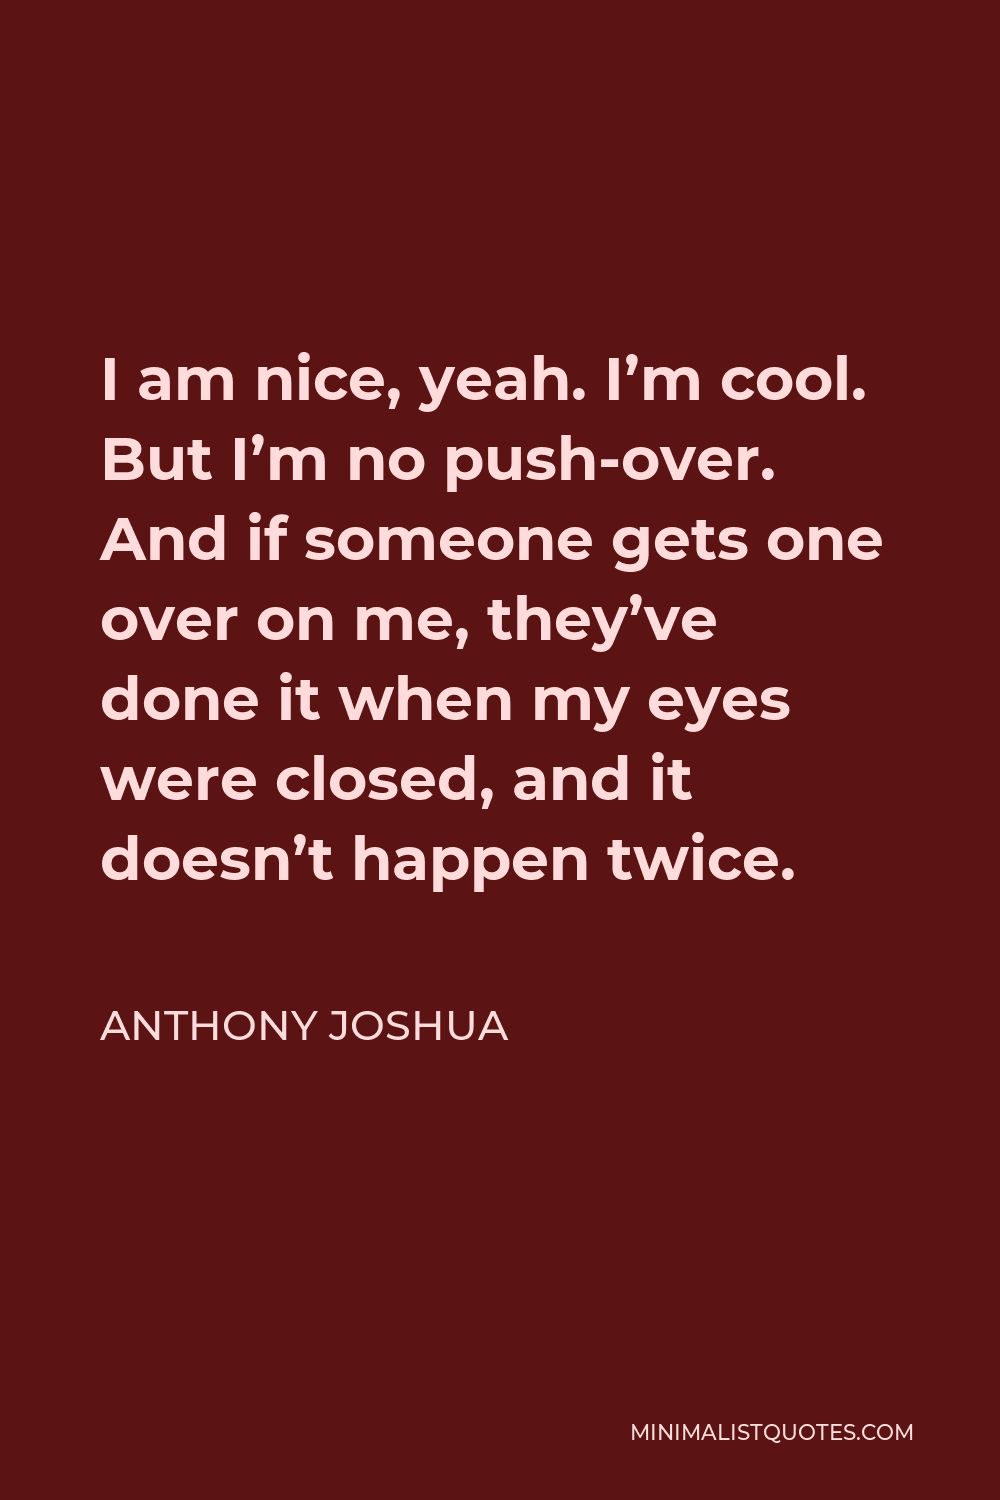 Anthony Joshua Quote - I am nice, yeah. I’m cool. But I’m no push-over. And if someone gets one over on me, they’ve done it when my eyes were closed, and it doesn’t happen twice.